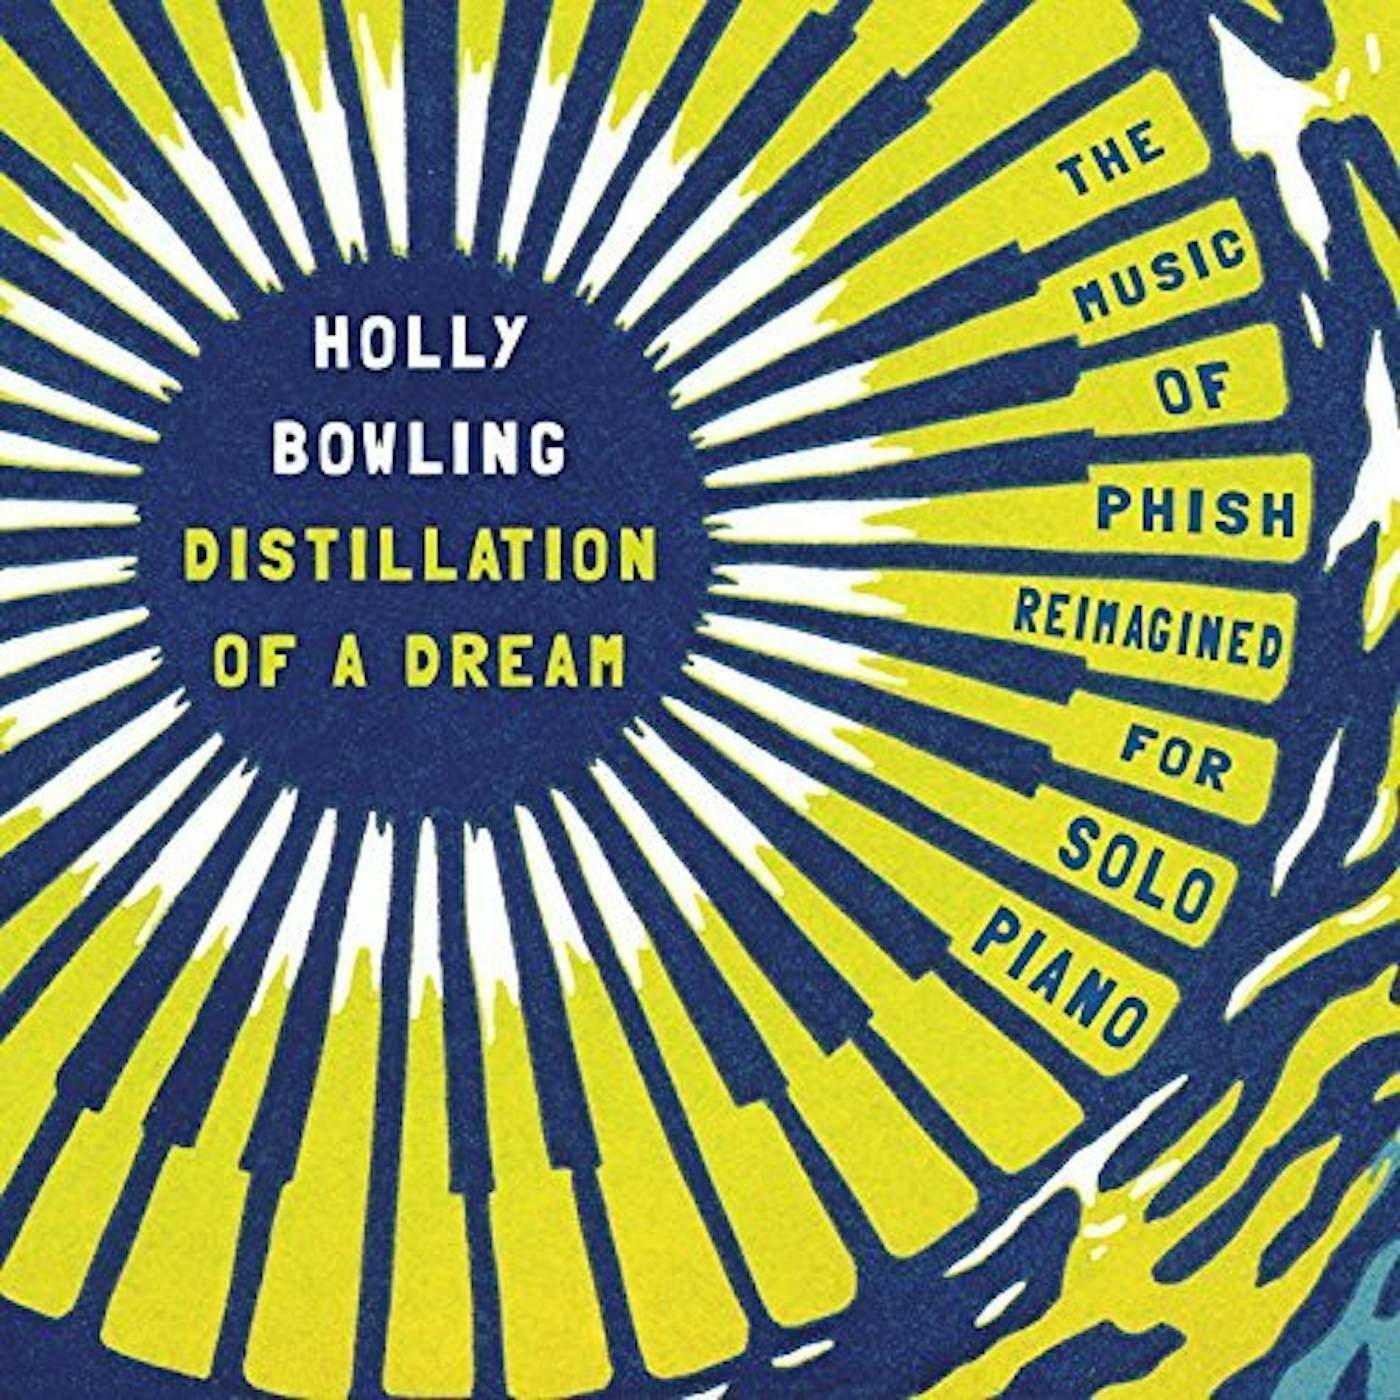 Holly Bowling DISTILLATION OF A DREAM: MUSIC OF PHISH REIMAGINED CD